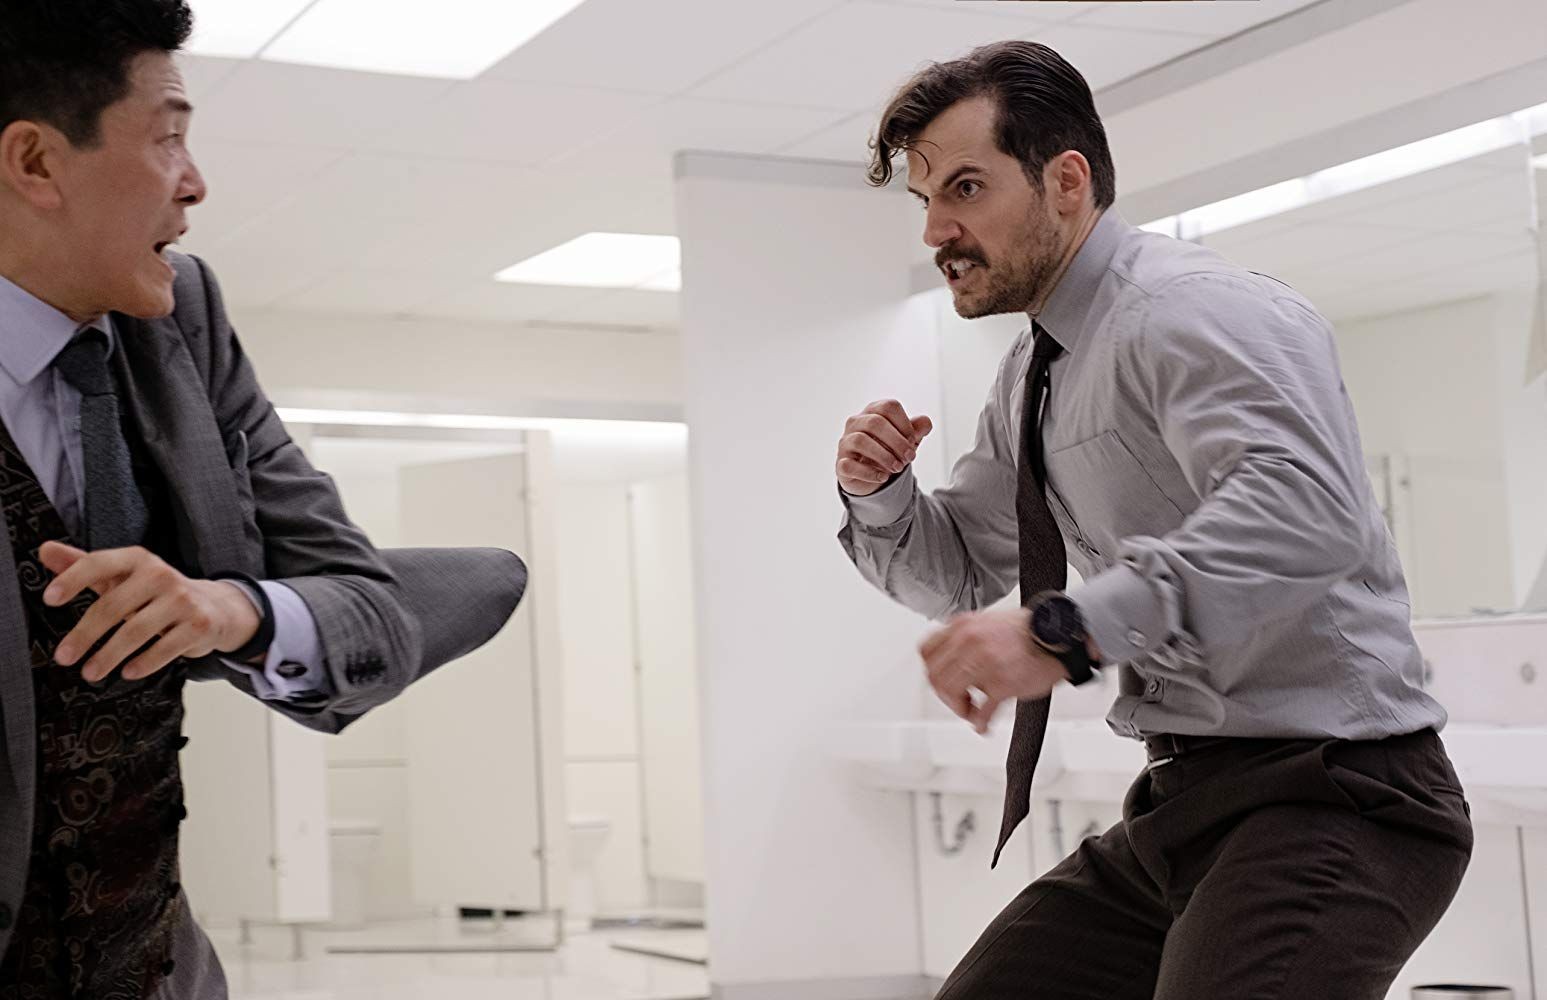 Henry Cavill fights Liang Yang in the infamous bathroom brawl